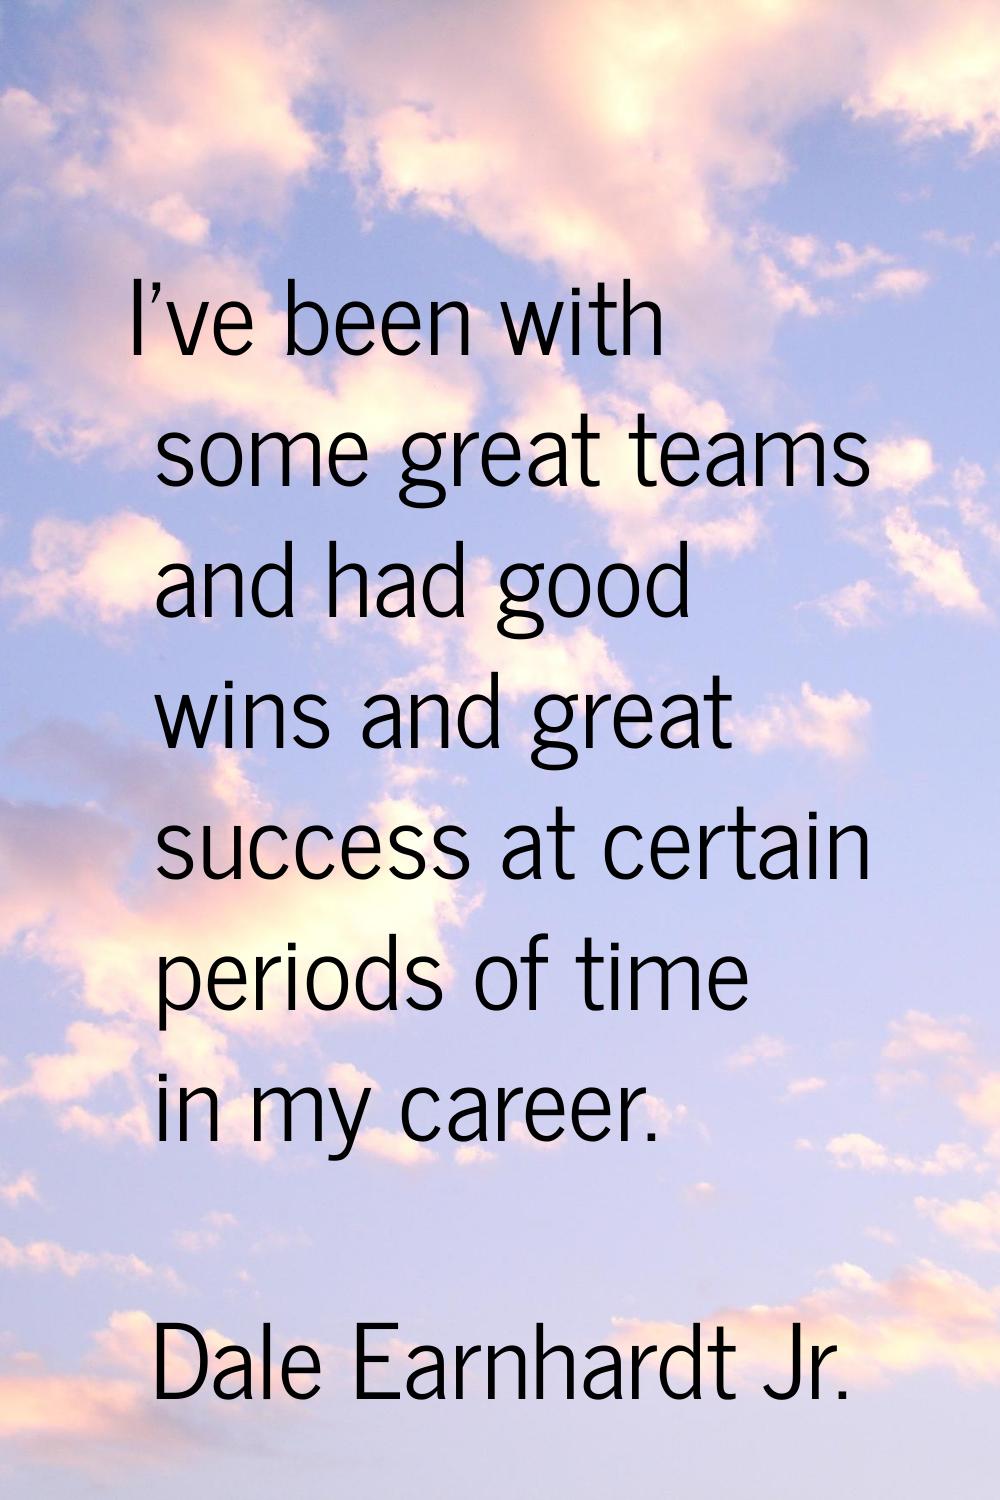 I've been with some great teams and had good wins and great success at certain periods of time in m